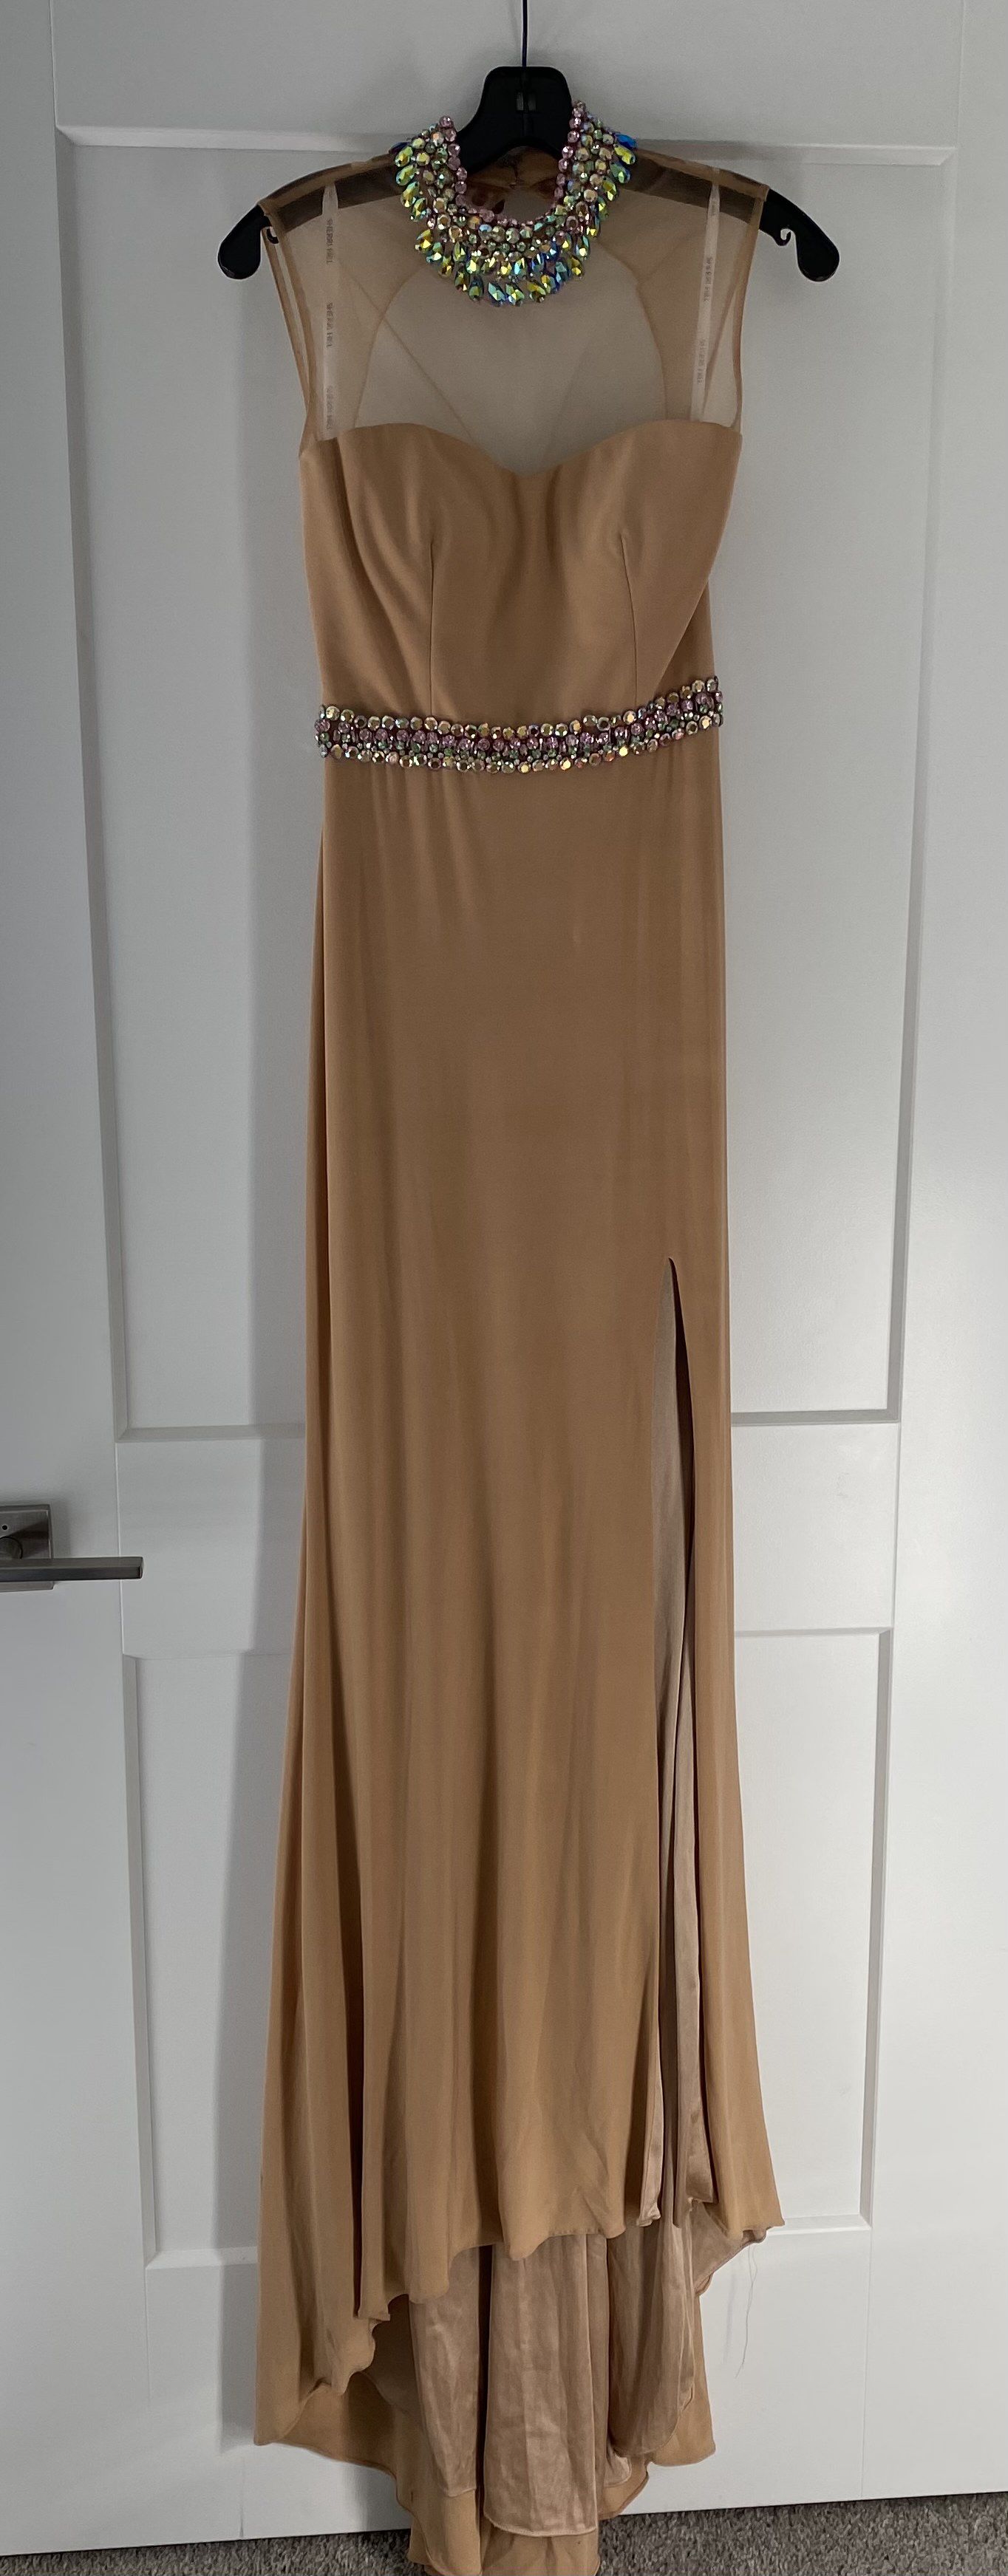 Sherri Hill Size 2 Bridesmaid High Neck Sequined Nude Side Slit Dress on Queenly